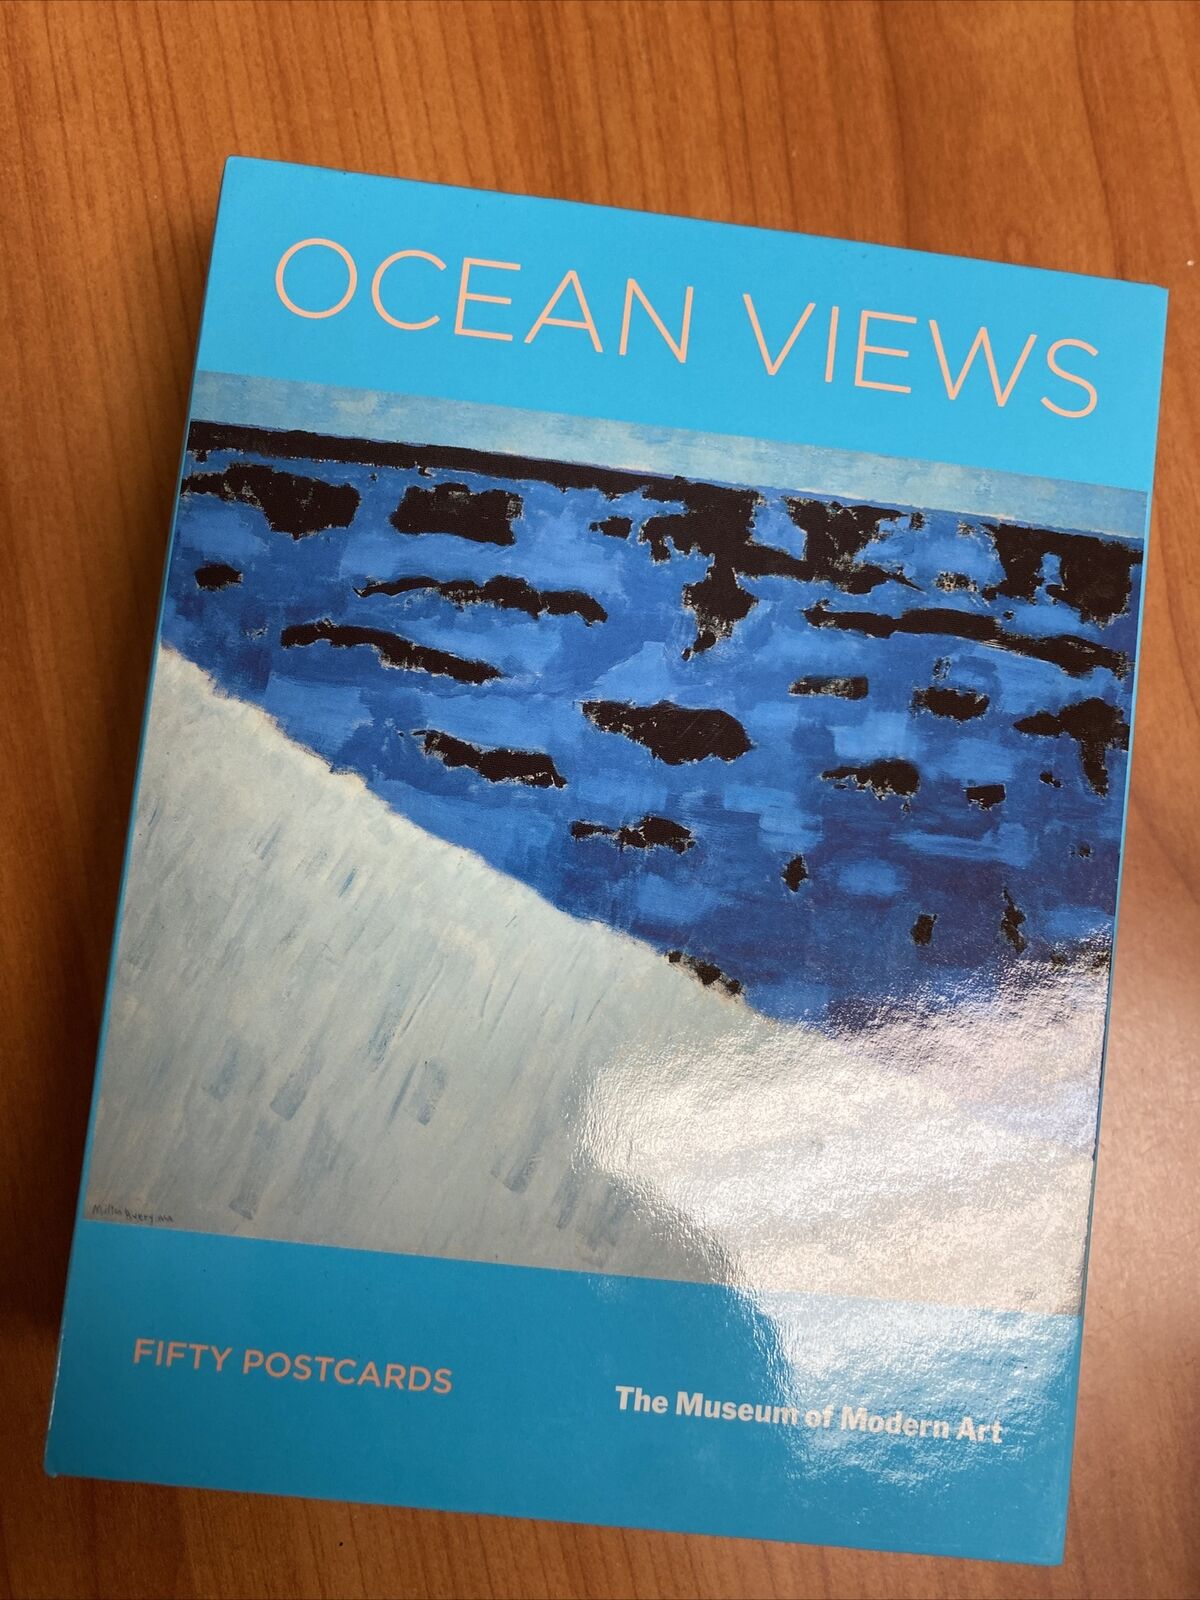 New-in-box: MOMA Museum of Modern Art NY - Ocean Views 50 postcards